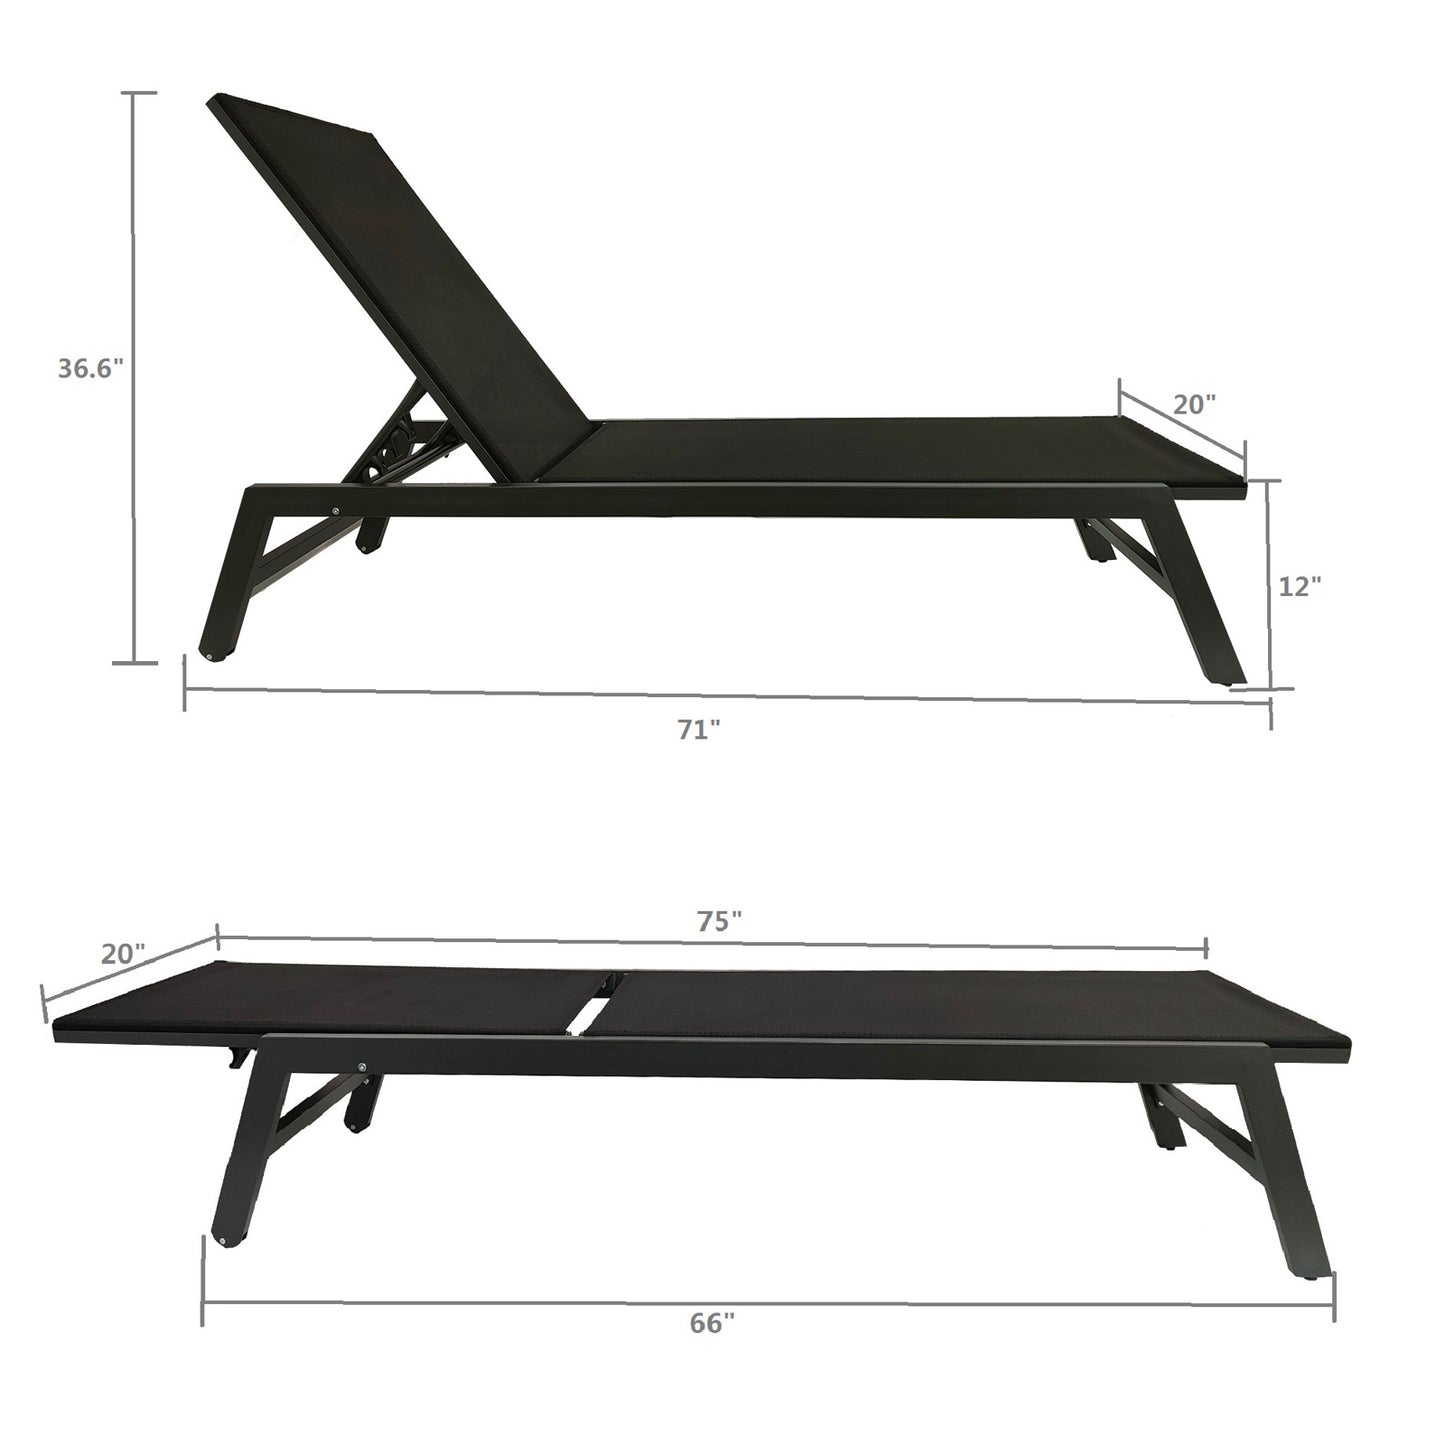 Outdoor 2-Pcs Set Chaise Lounge Chairs